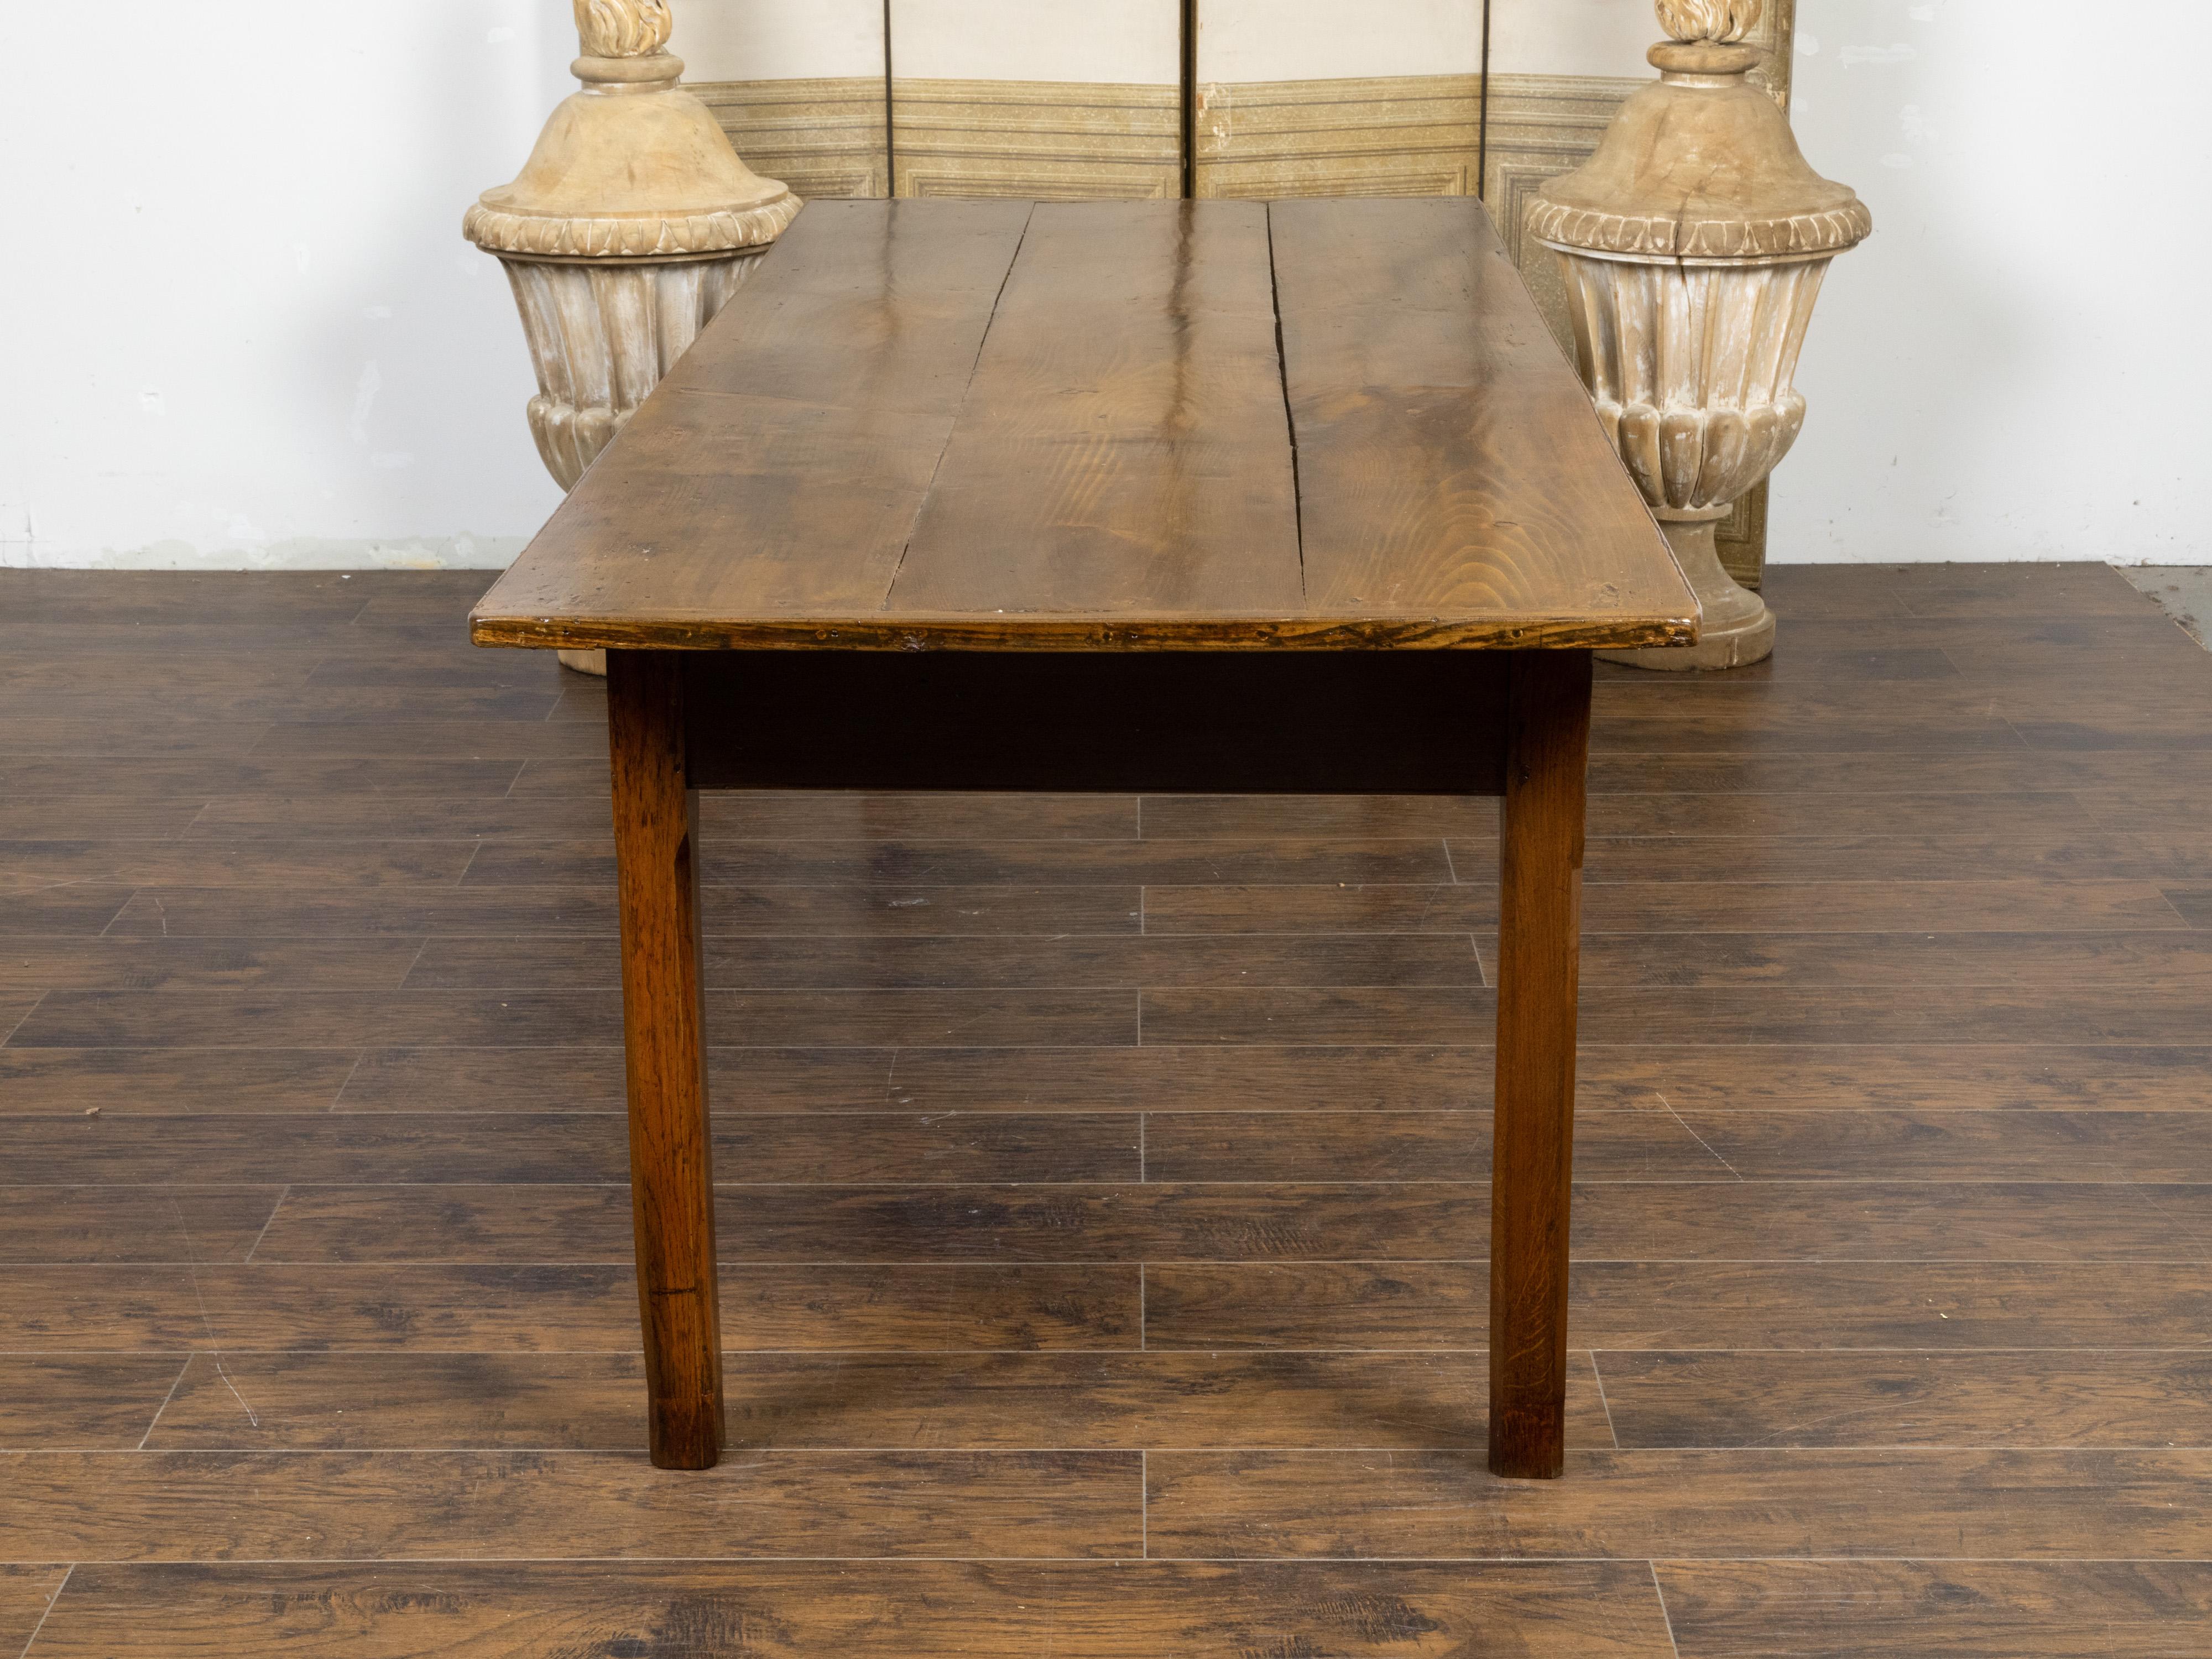 Stained Country French Rustic Pine Farm Table with Straight Legs from the 19th Century For Sale